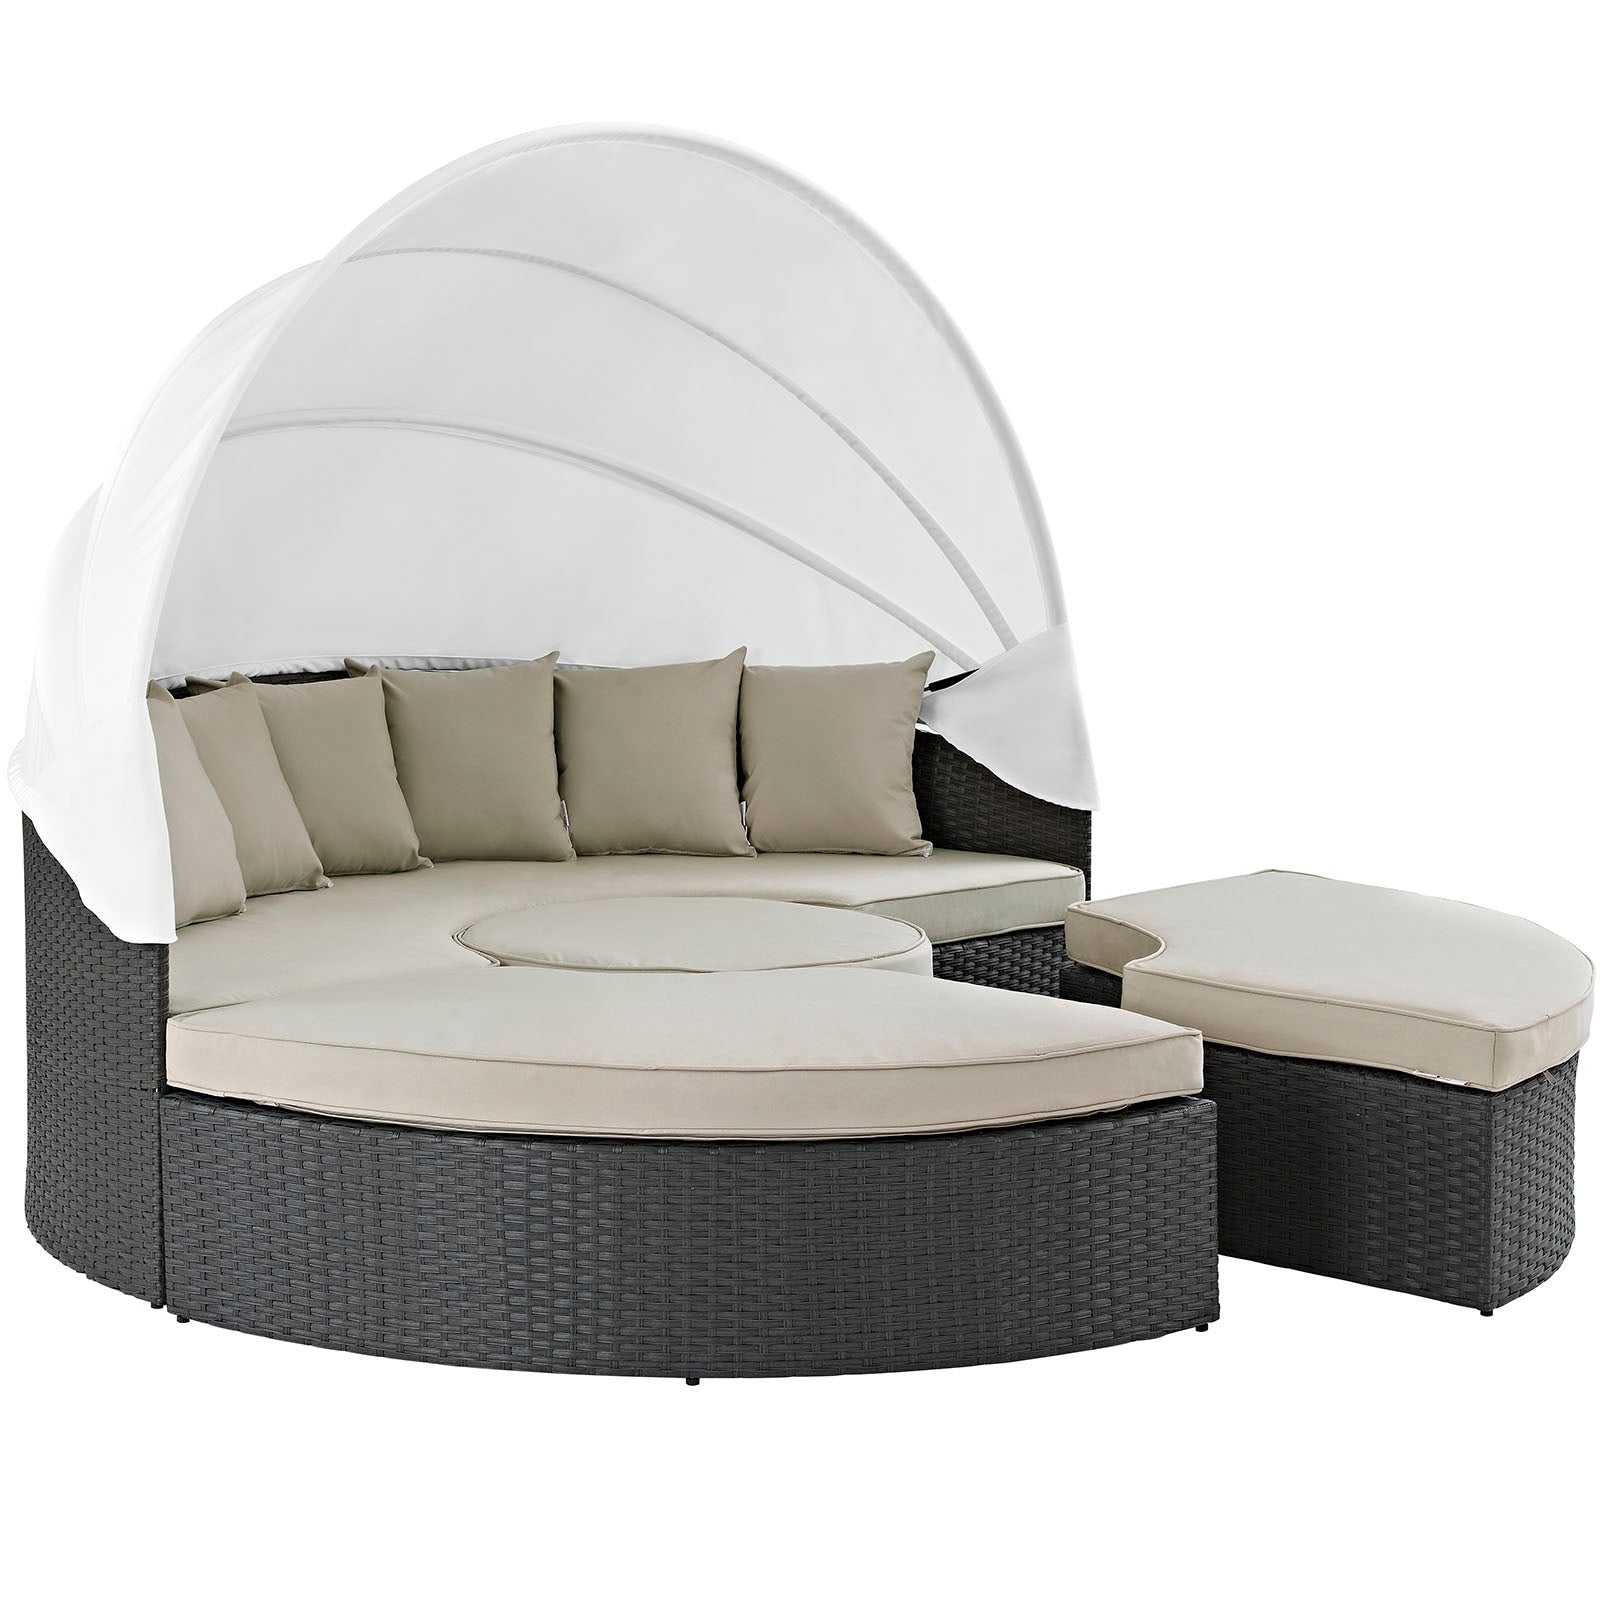 Modway Patio Daybeds - Sojourn Outdoor Patio Sunbrella 86.5"W Daybed Antique Canvas Beige